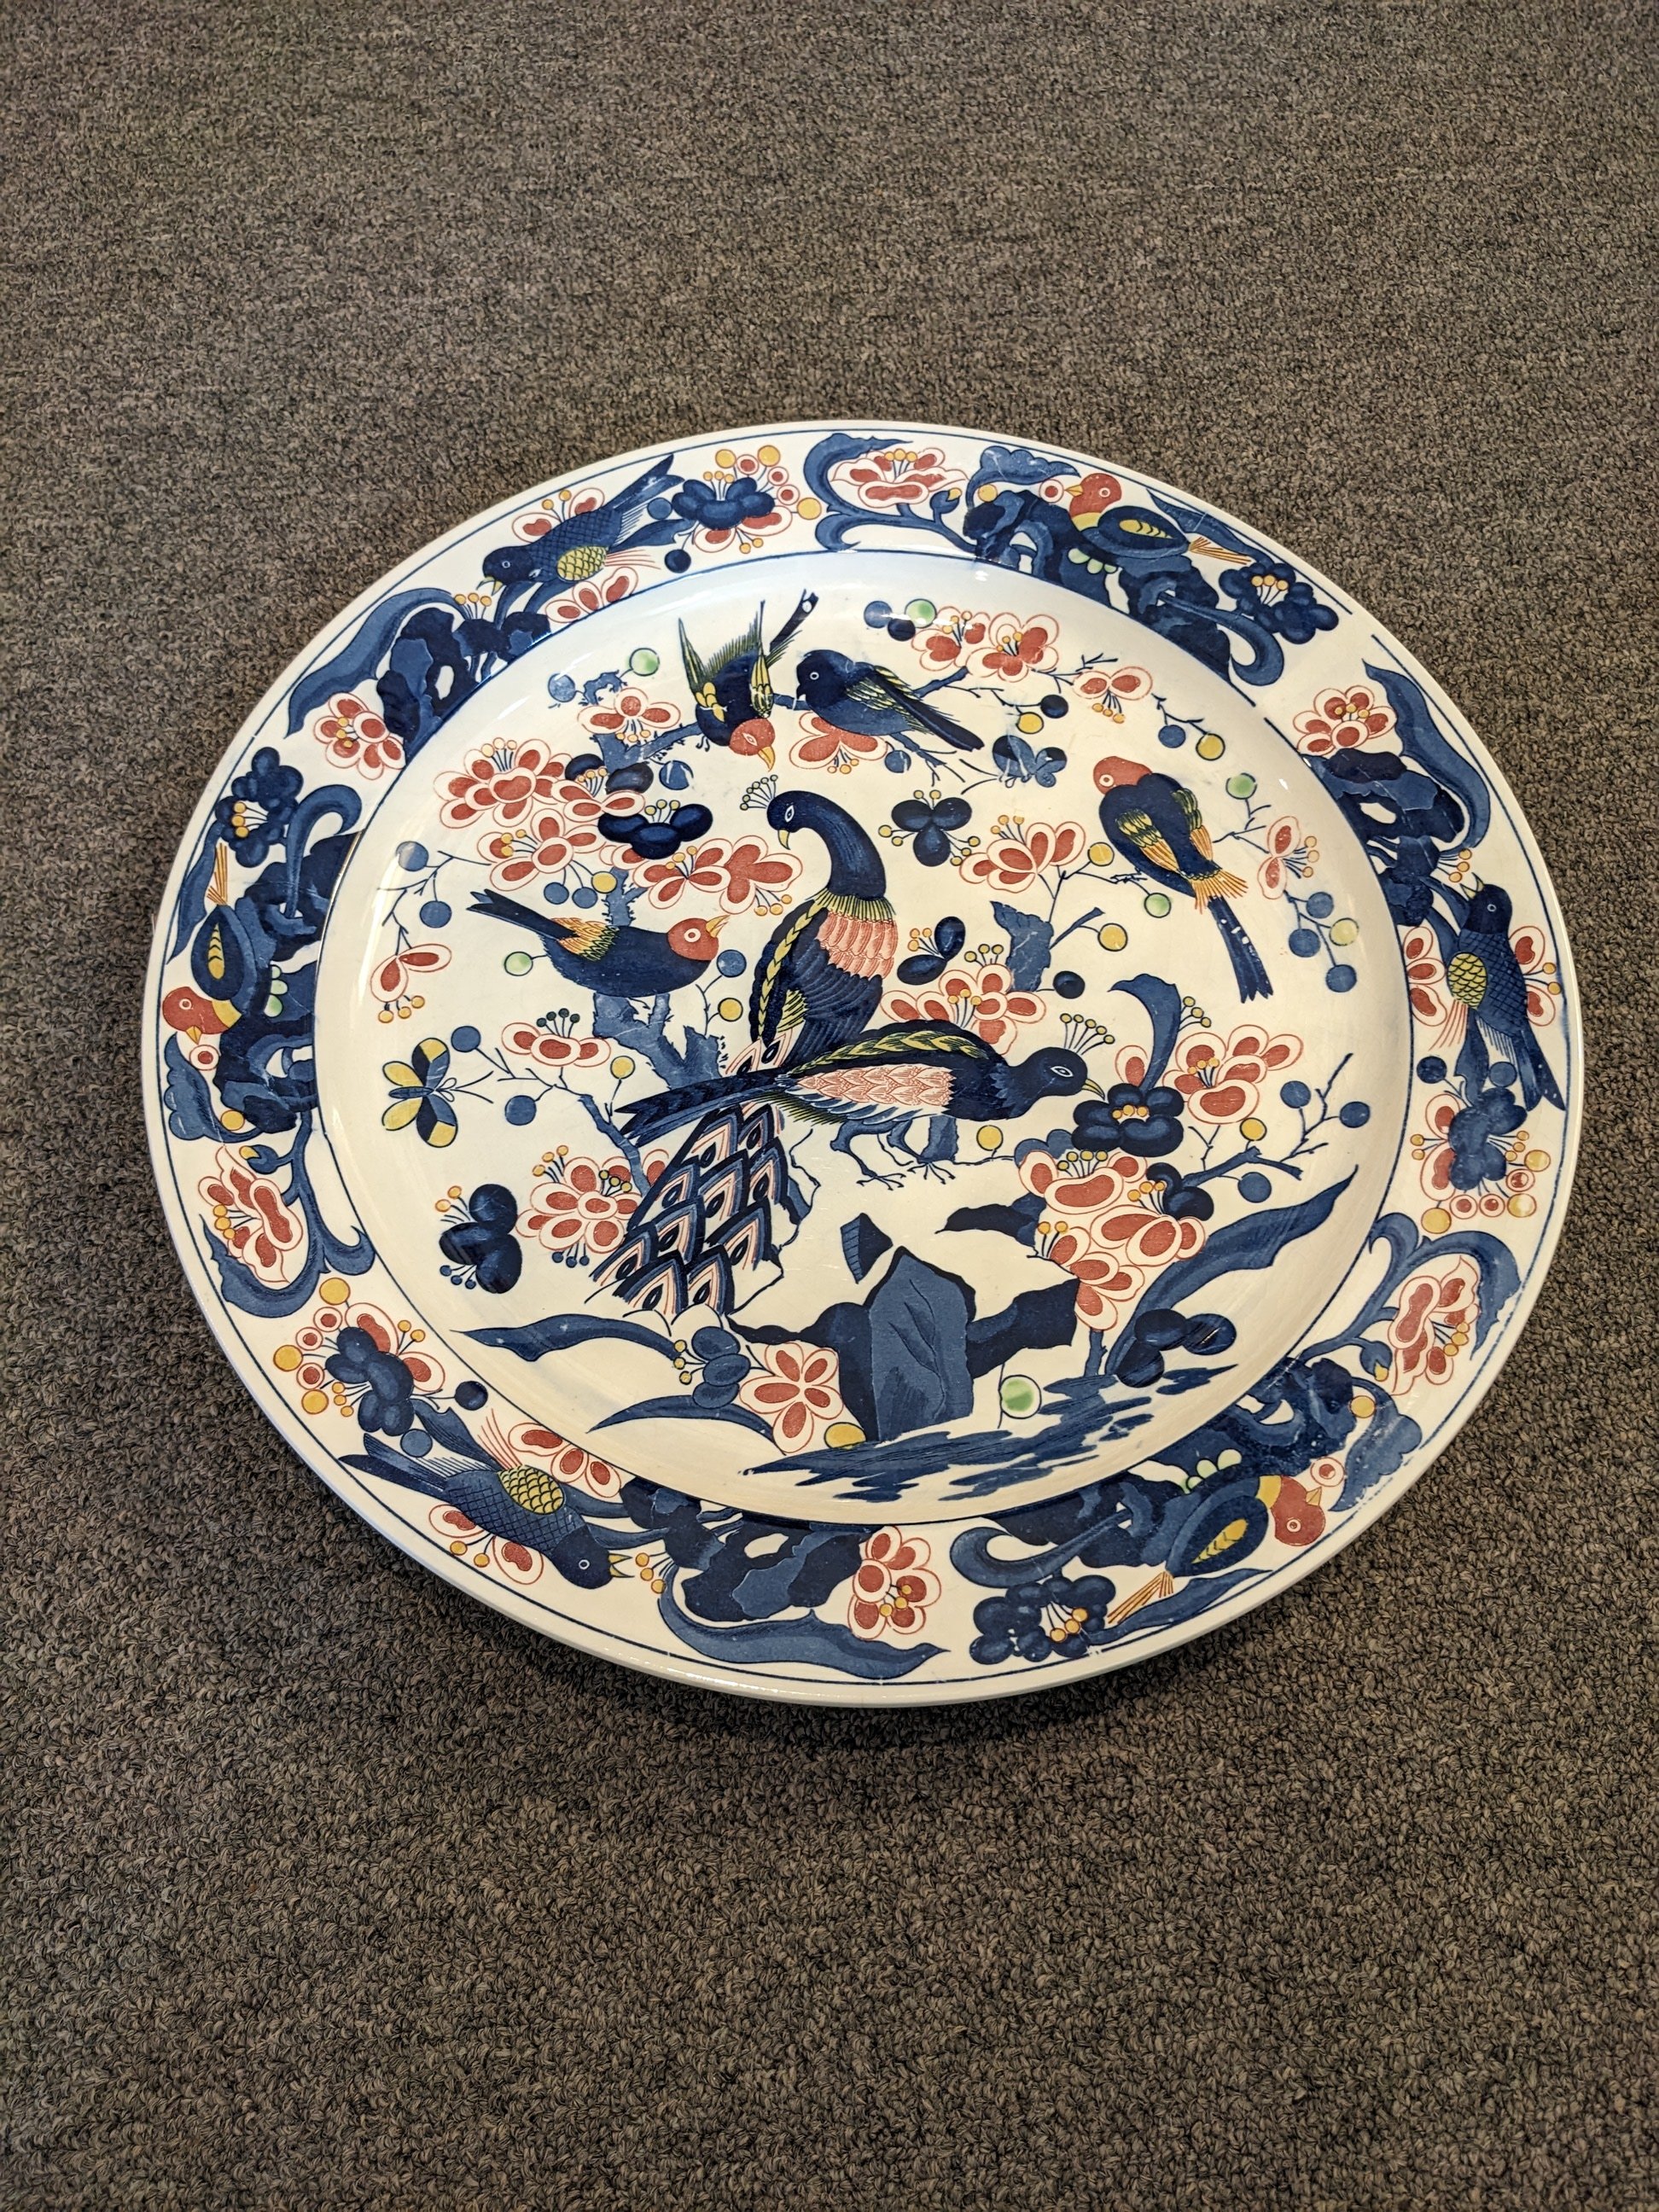 Round Peacock Charger/Plate